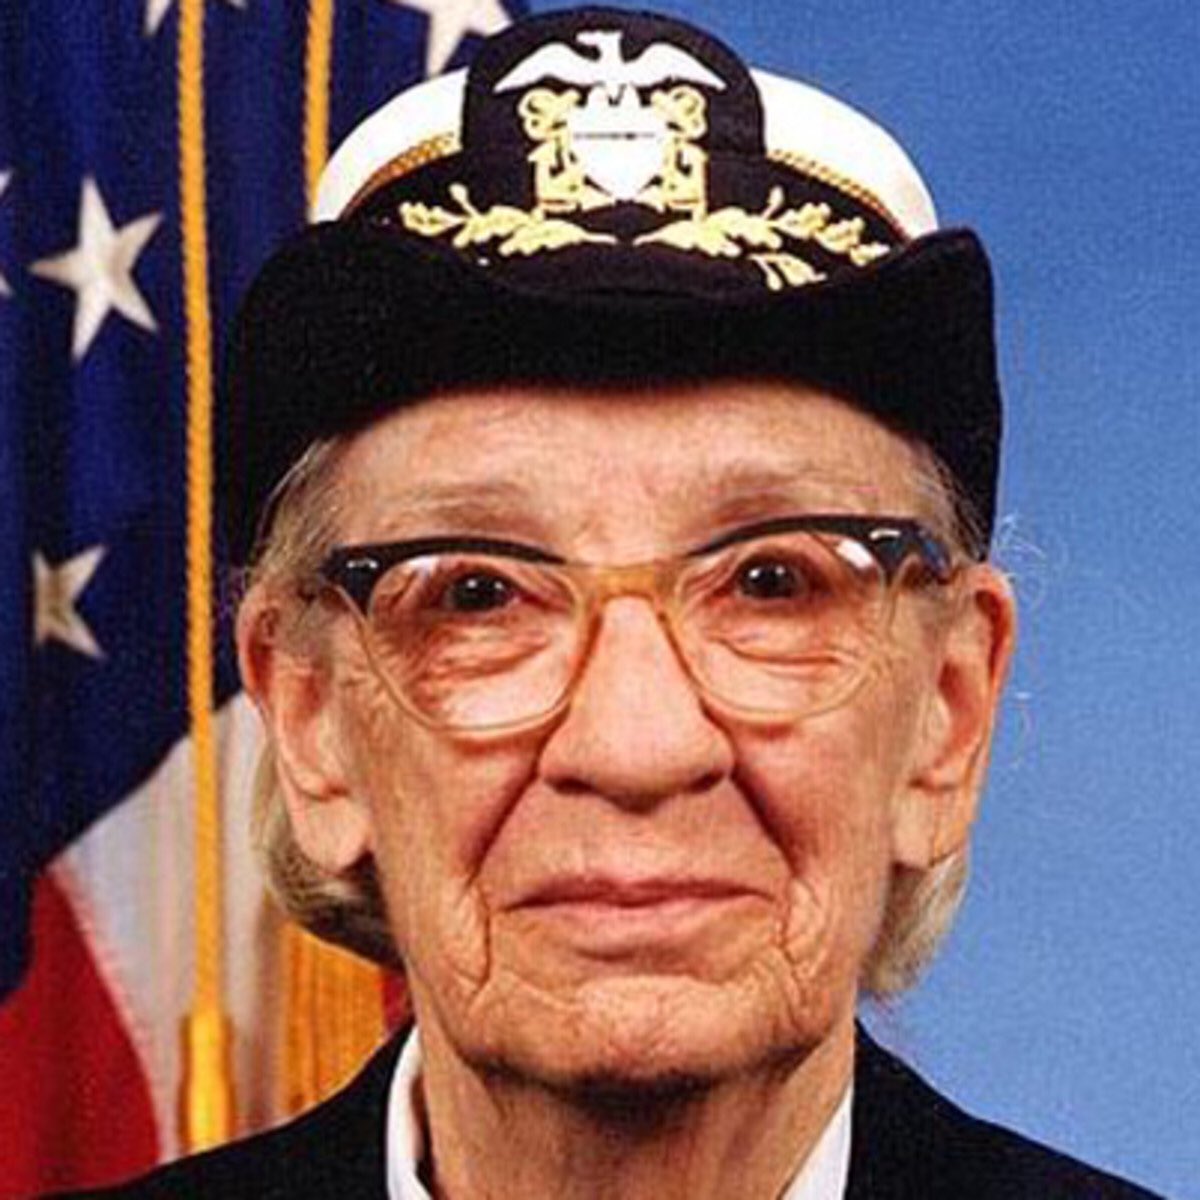 4)Grace Hopper: “The mother of computing" wrked at de Harvard Computation Lab as part of the Navy Reserve, programmx the Mark 1 computer tht brought speed and accuracy 2 military initiatives. Her accolades include creatx the 1st compiler. Look at tht smile,a true queen  #TeamSteph